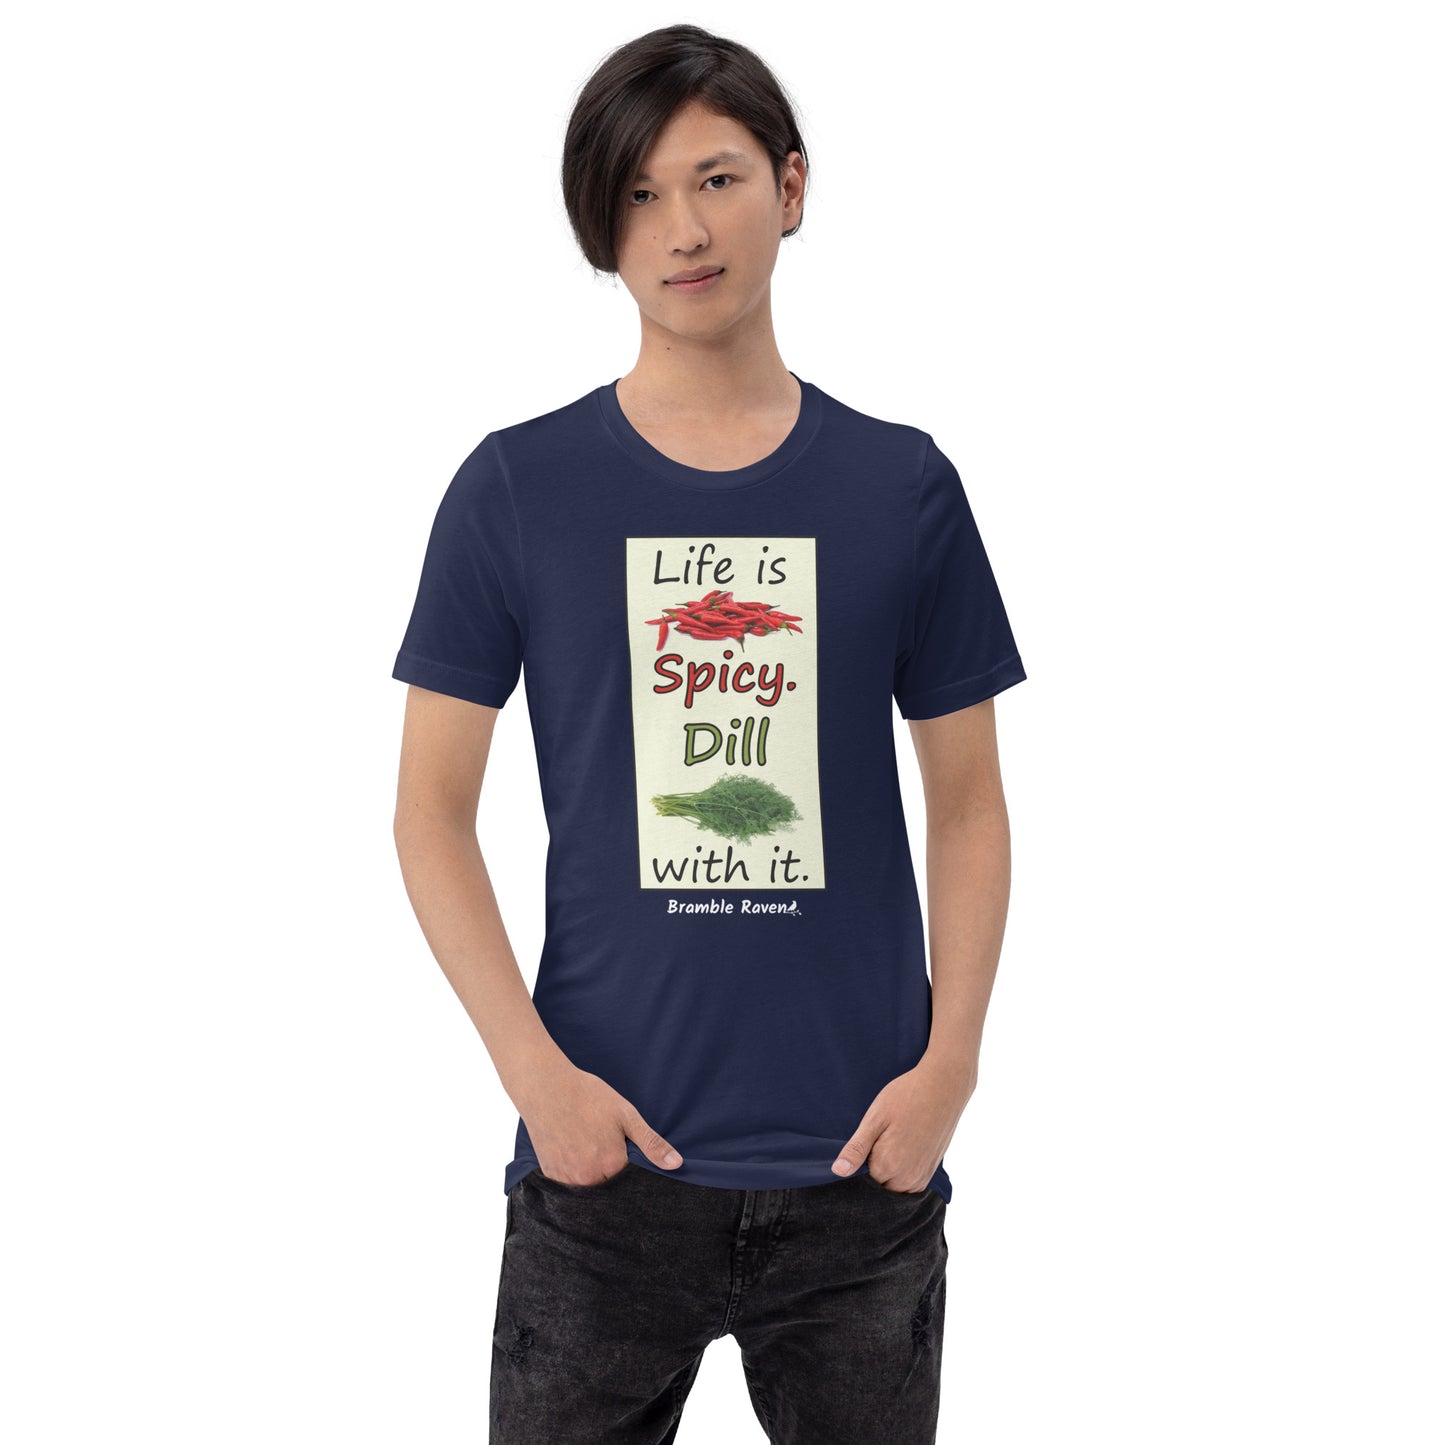 Life is spicy. Dill with it. Phrase with images of chili peppers and dill weed. Rectangular frame for saying on navy blue colored unisex t-shirt. Shown on male model.